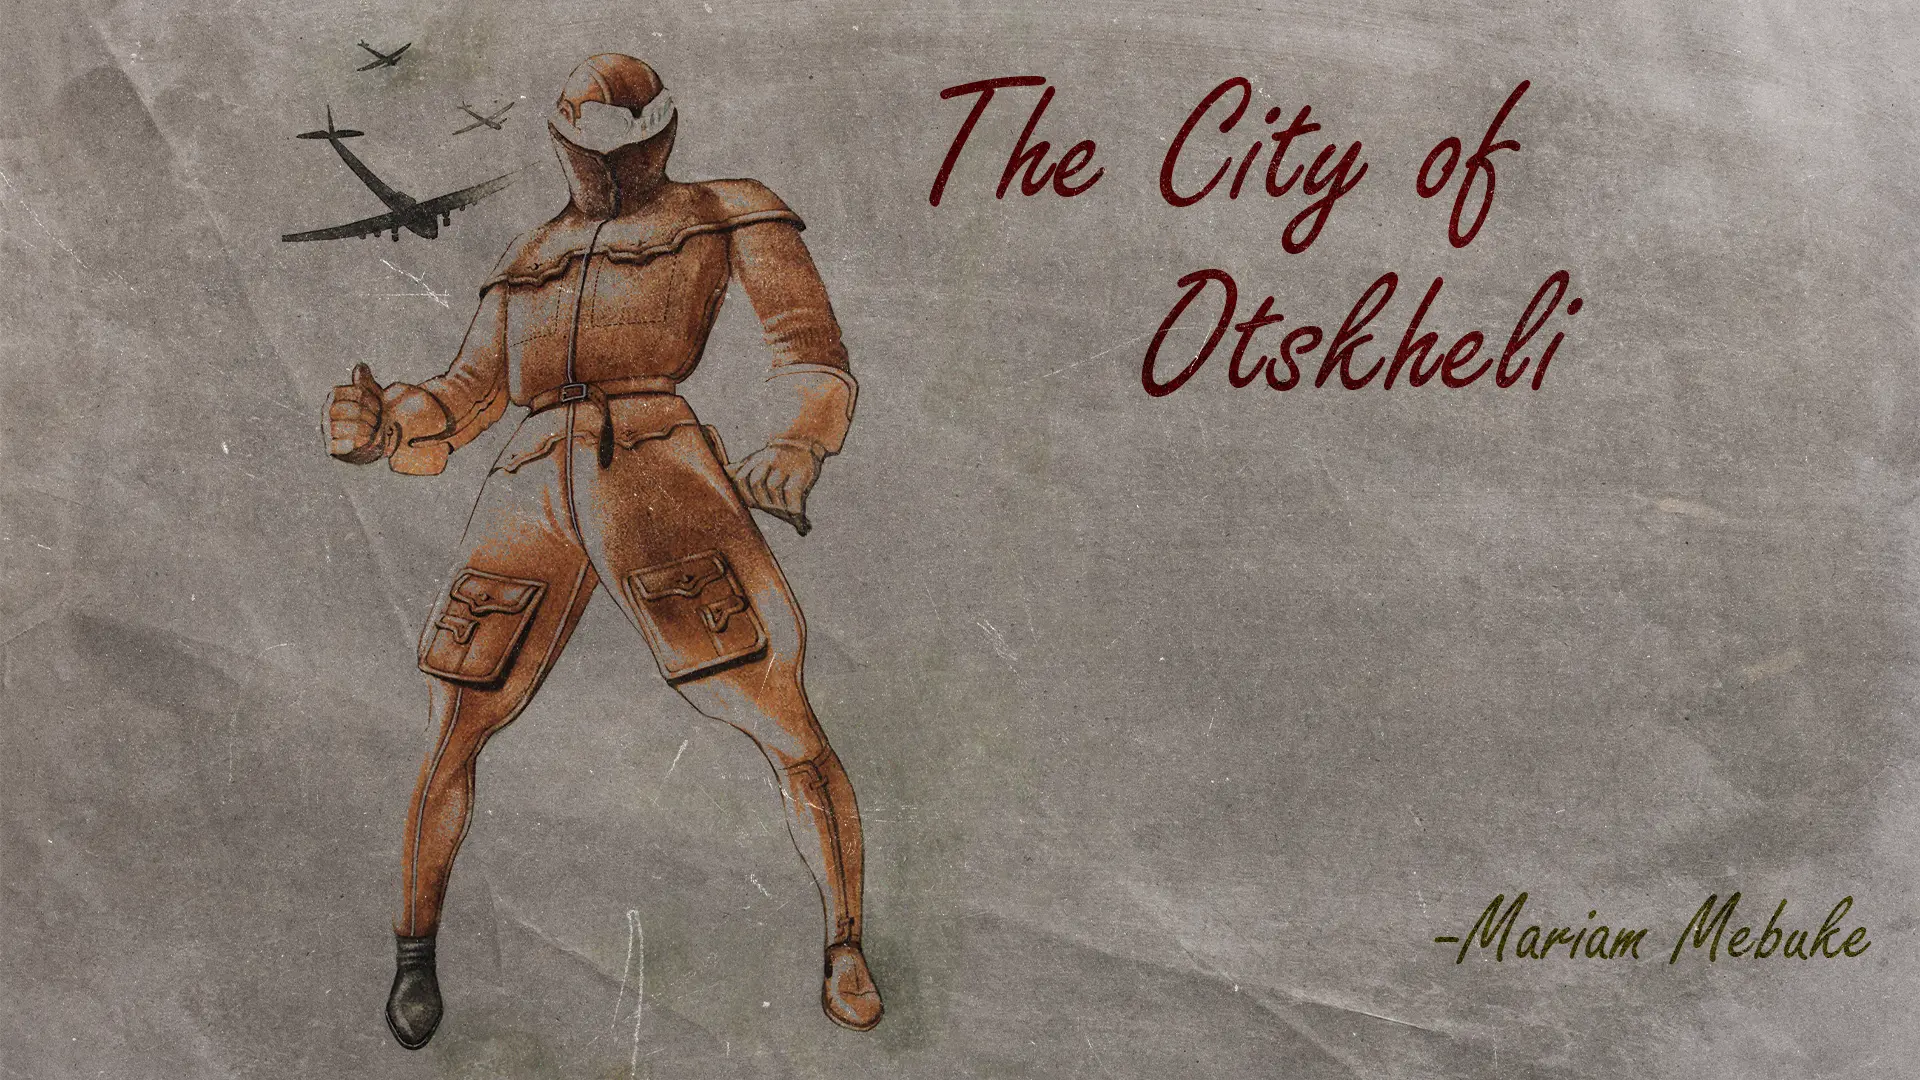 “The City of Otskheli – This (Not) How They Talk About Artists”